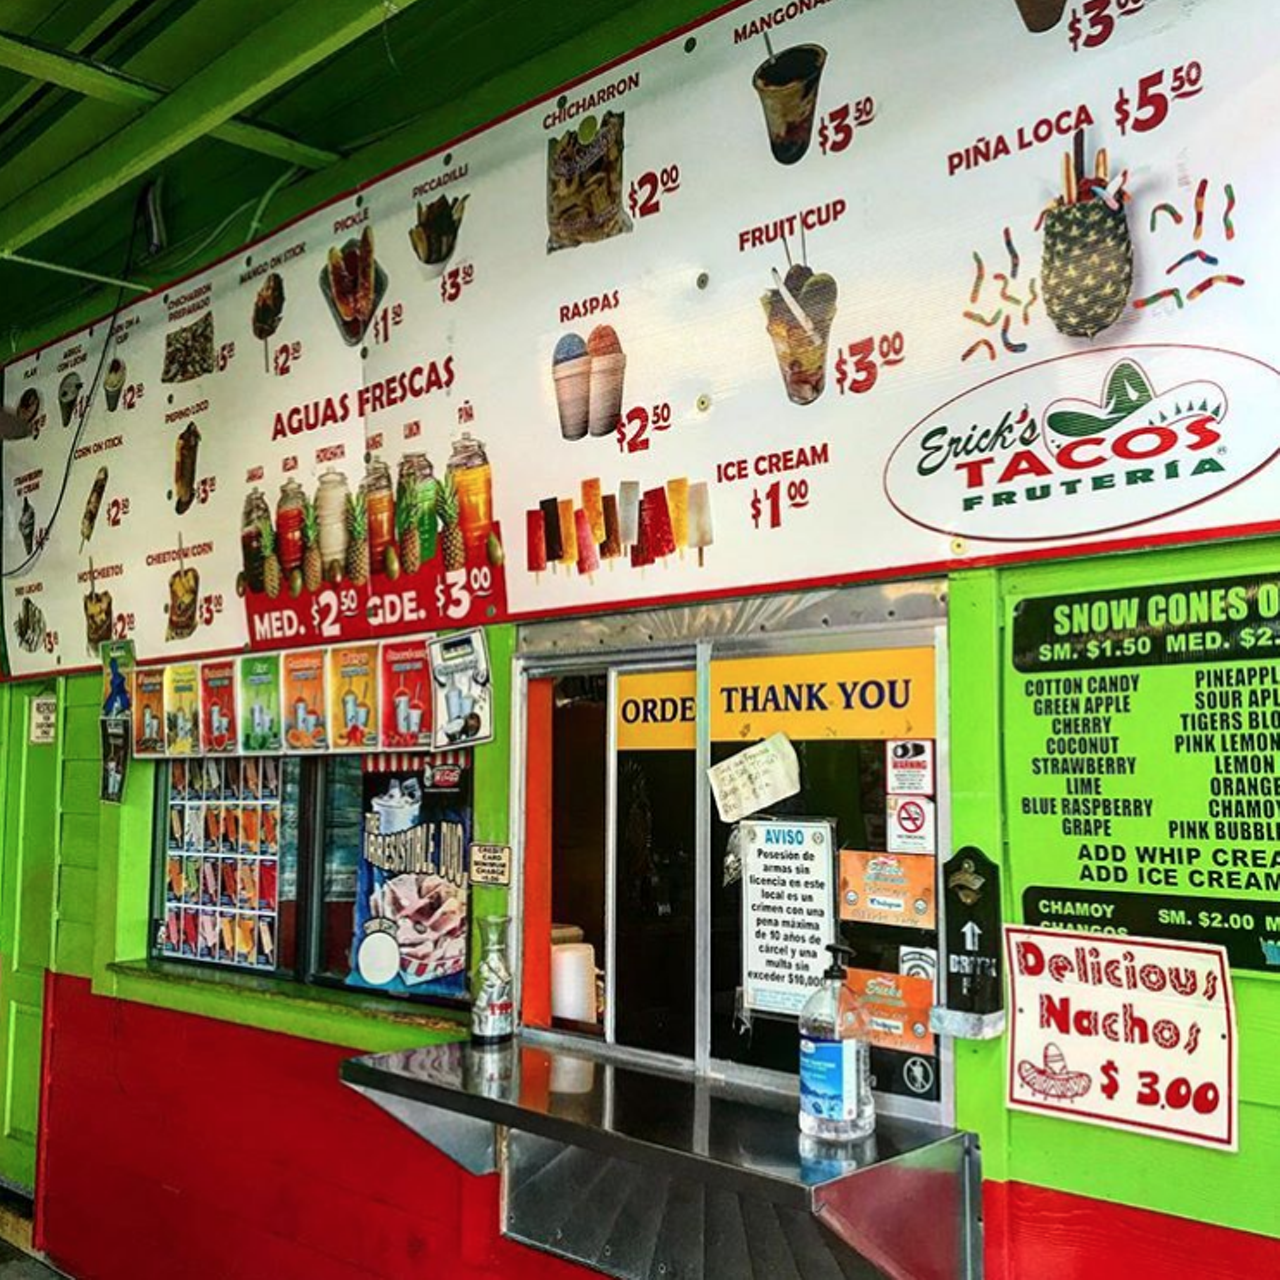 Erick’s Tacos
12715 Nacogdoches Road, (210) 590-0994, erickstacos.webs.com
Come for the tacos, stay for the champurrado. Or maybe it’s the other way around? Either way, Erick’s will definitely make your stomach happy. This joint taco truck and fruteria brings the best of both worlds together, letting you keep warm with champurrado or even arroz con leche.
Photo via Instagram / ey219